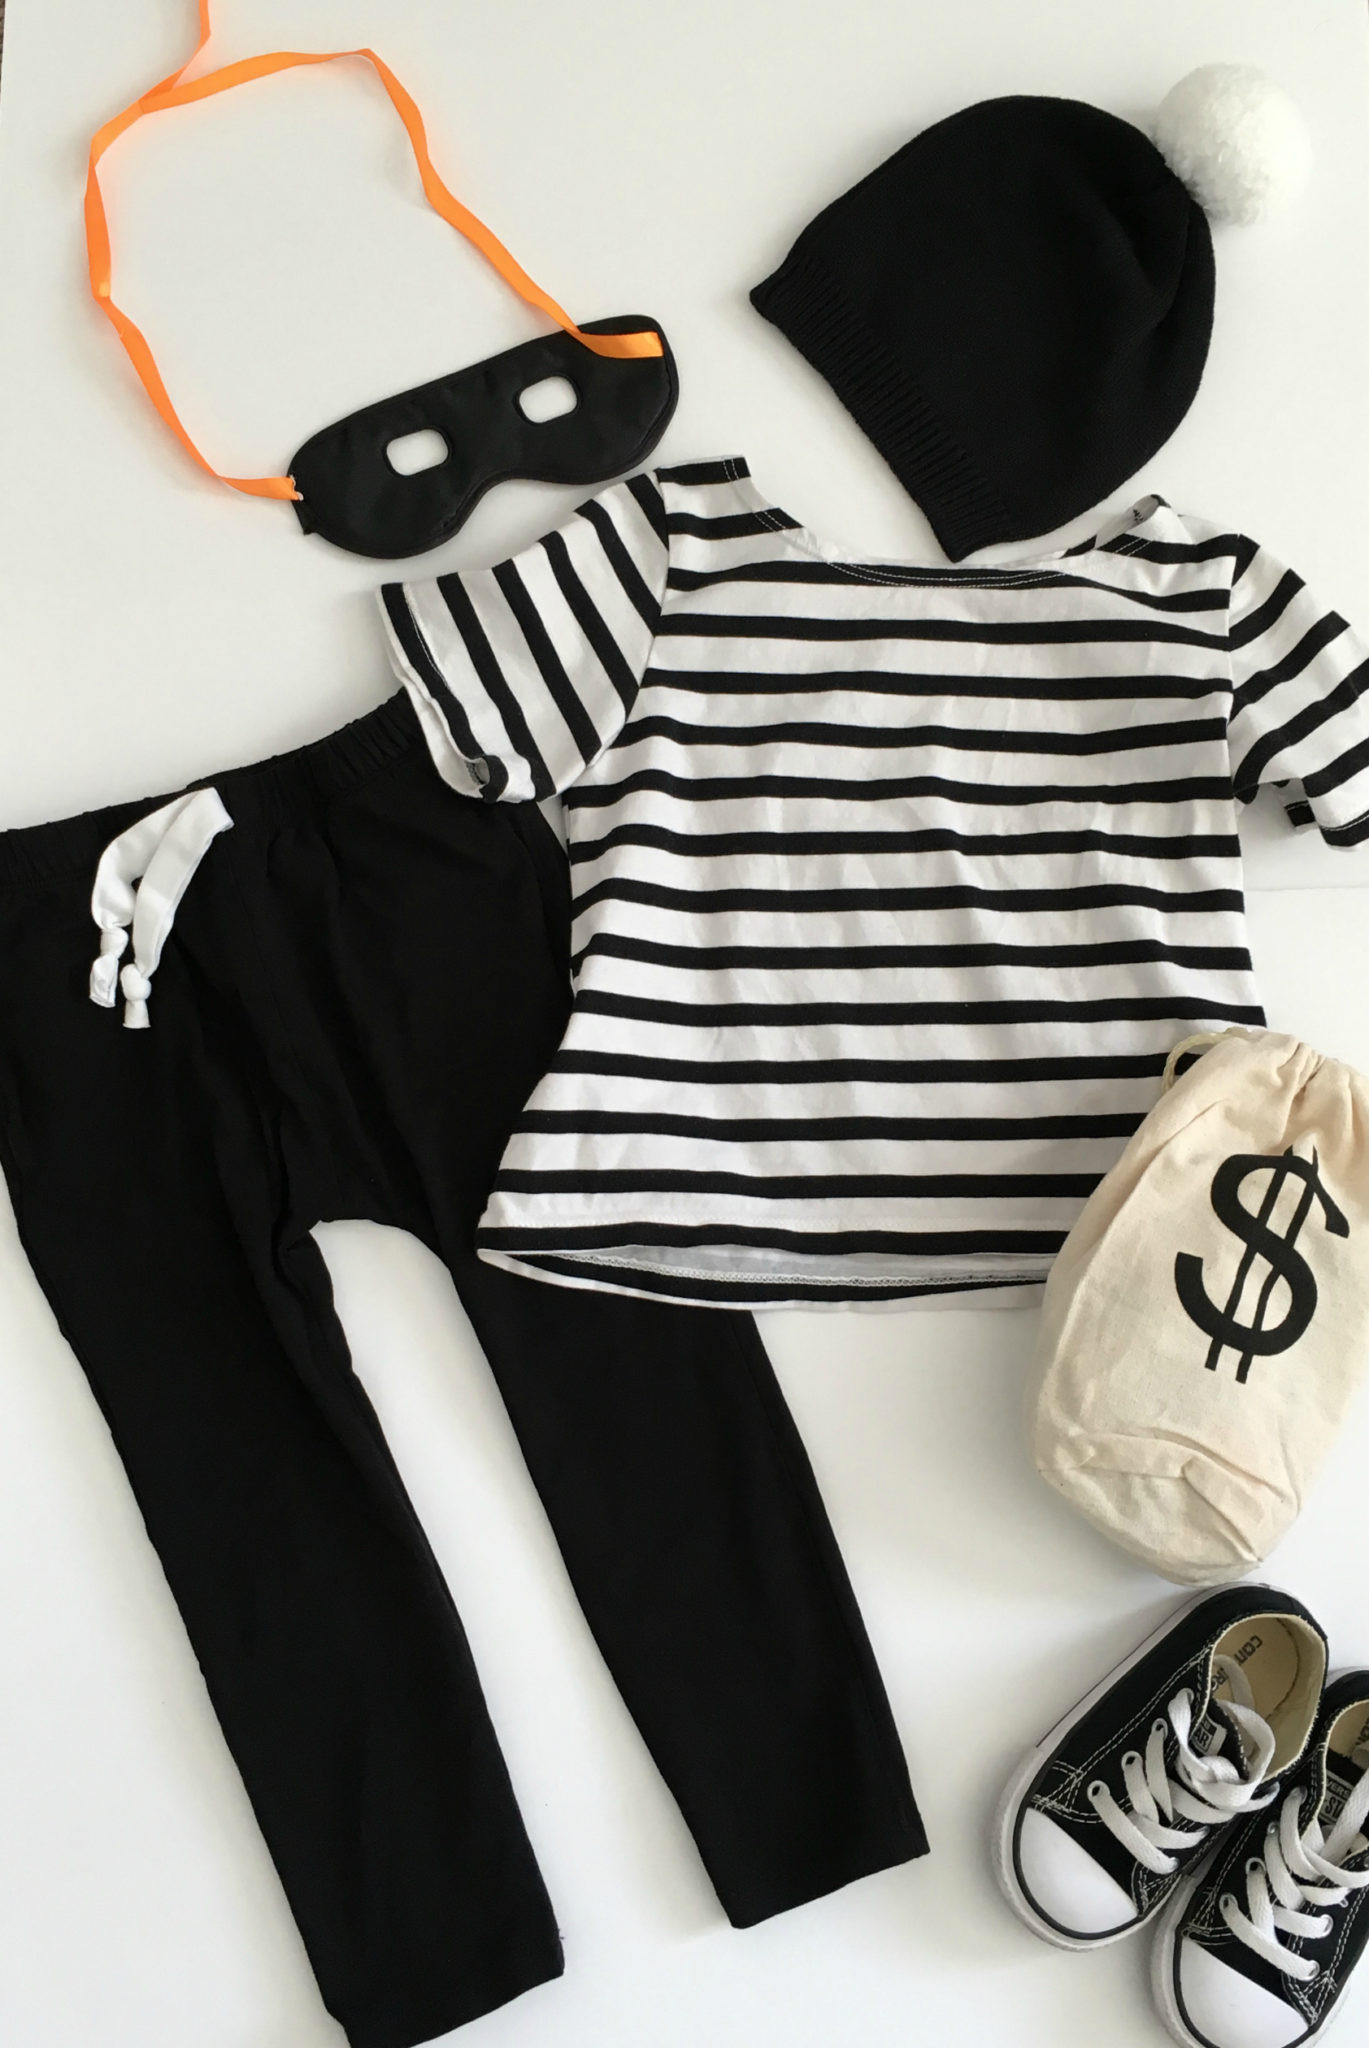 DIY Robber Mask
 DIY Toddler Bank Robber Costume This Bliss Life